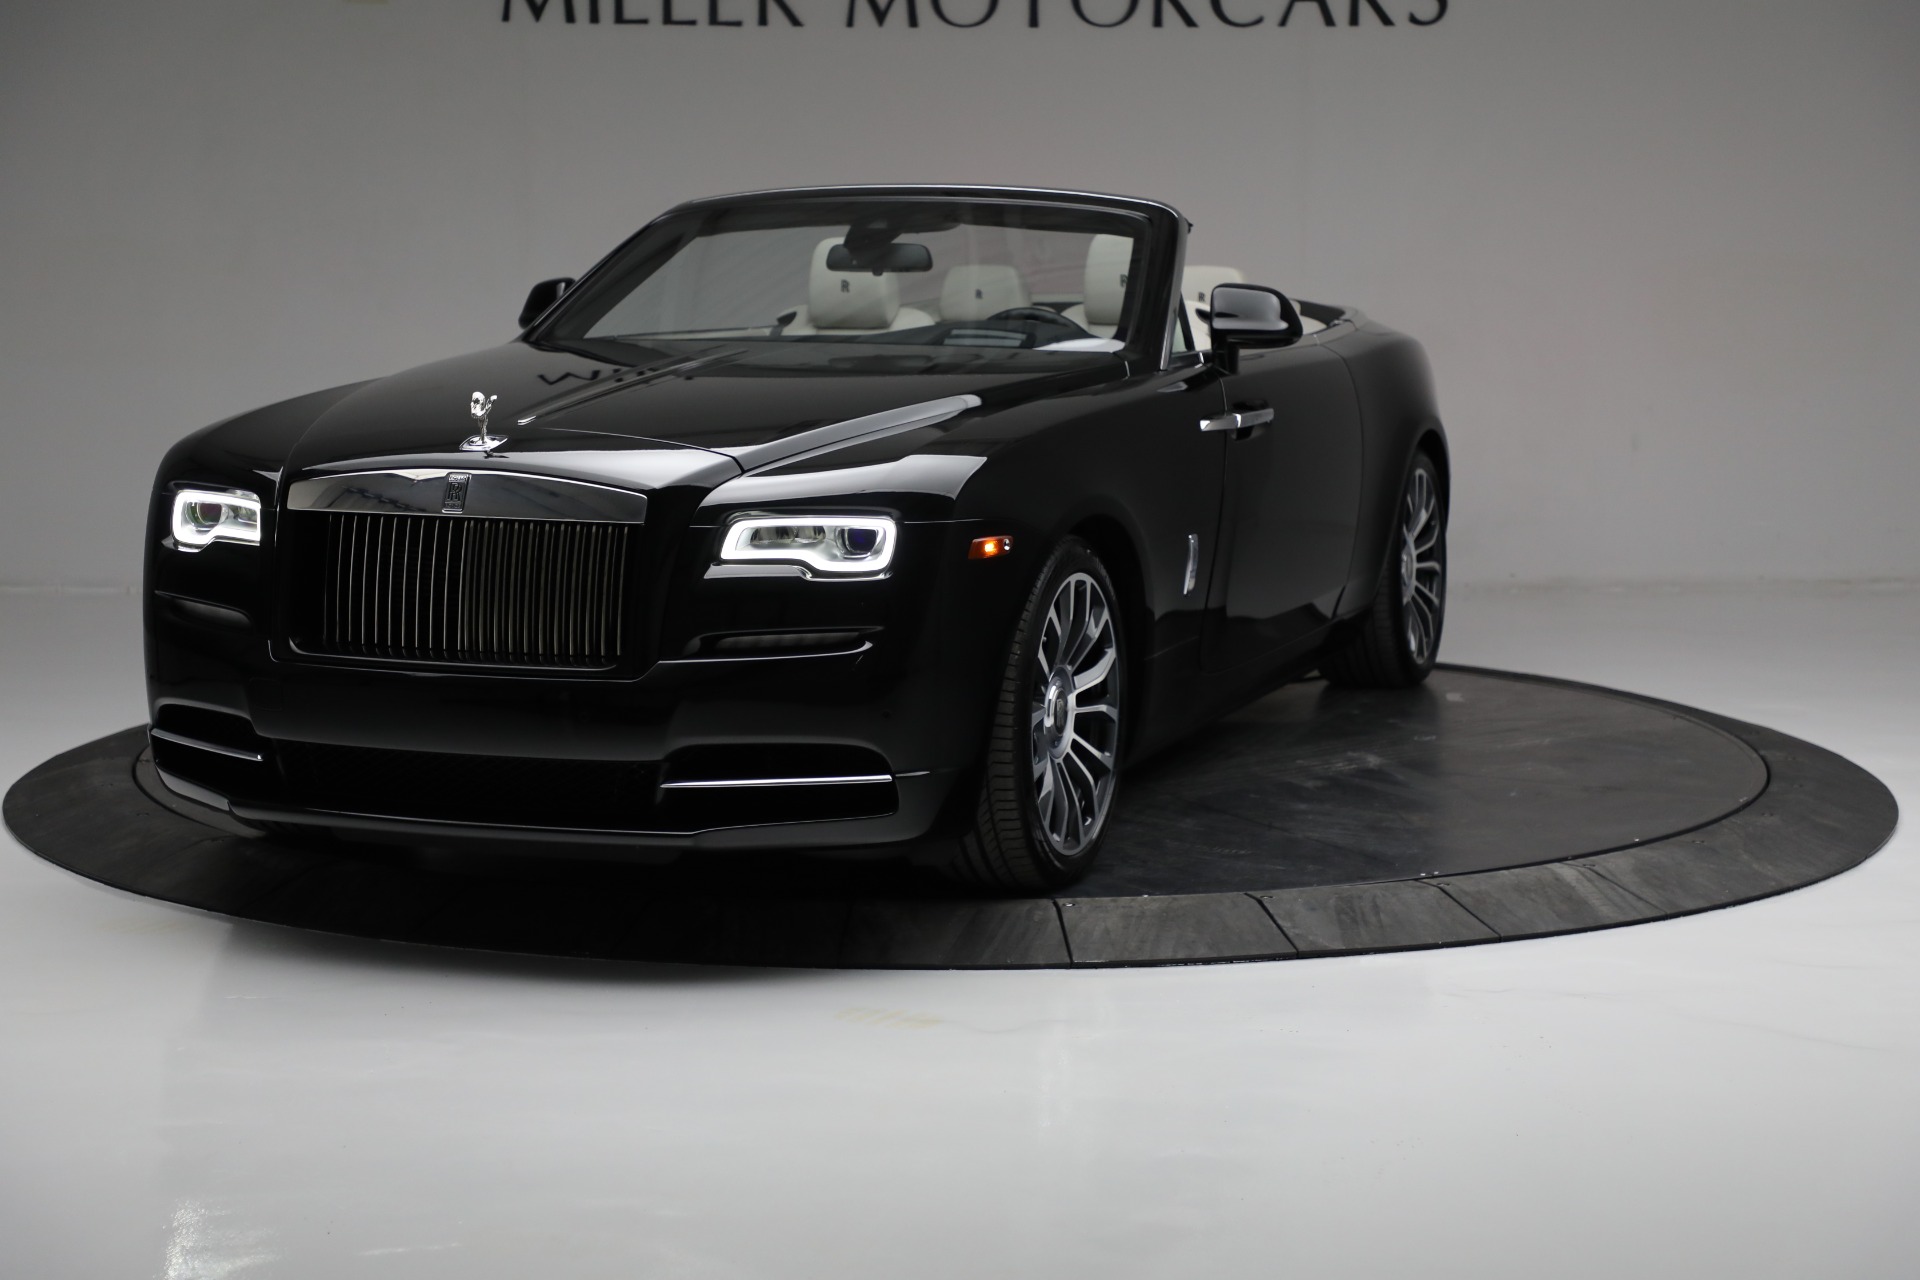 Used 2018 Rolls-Royce Dawn for sale $319,900 at McLaren Greenwich in Greenwich CT 06830 1